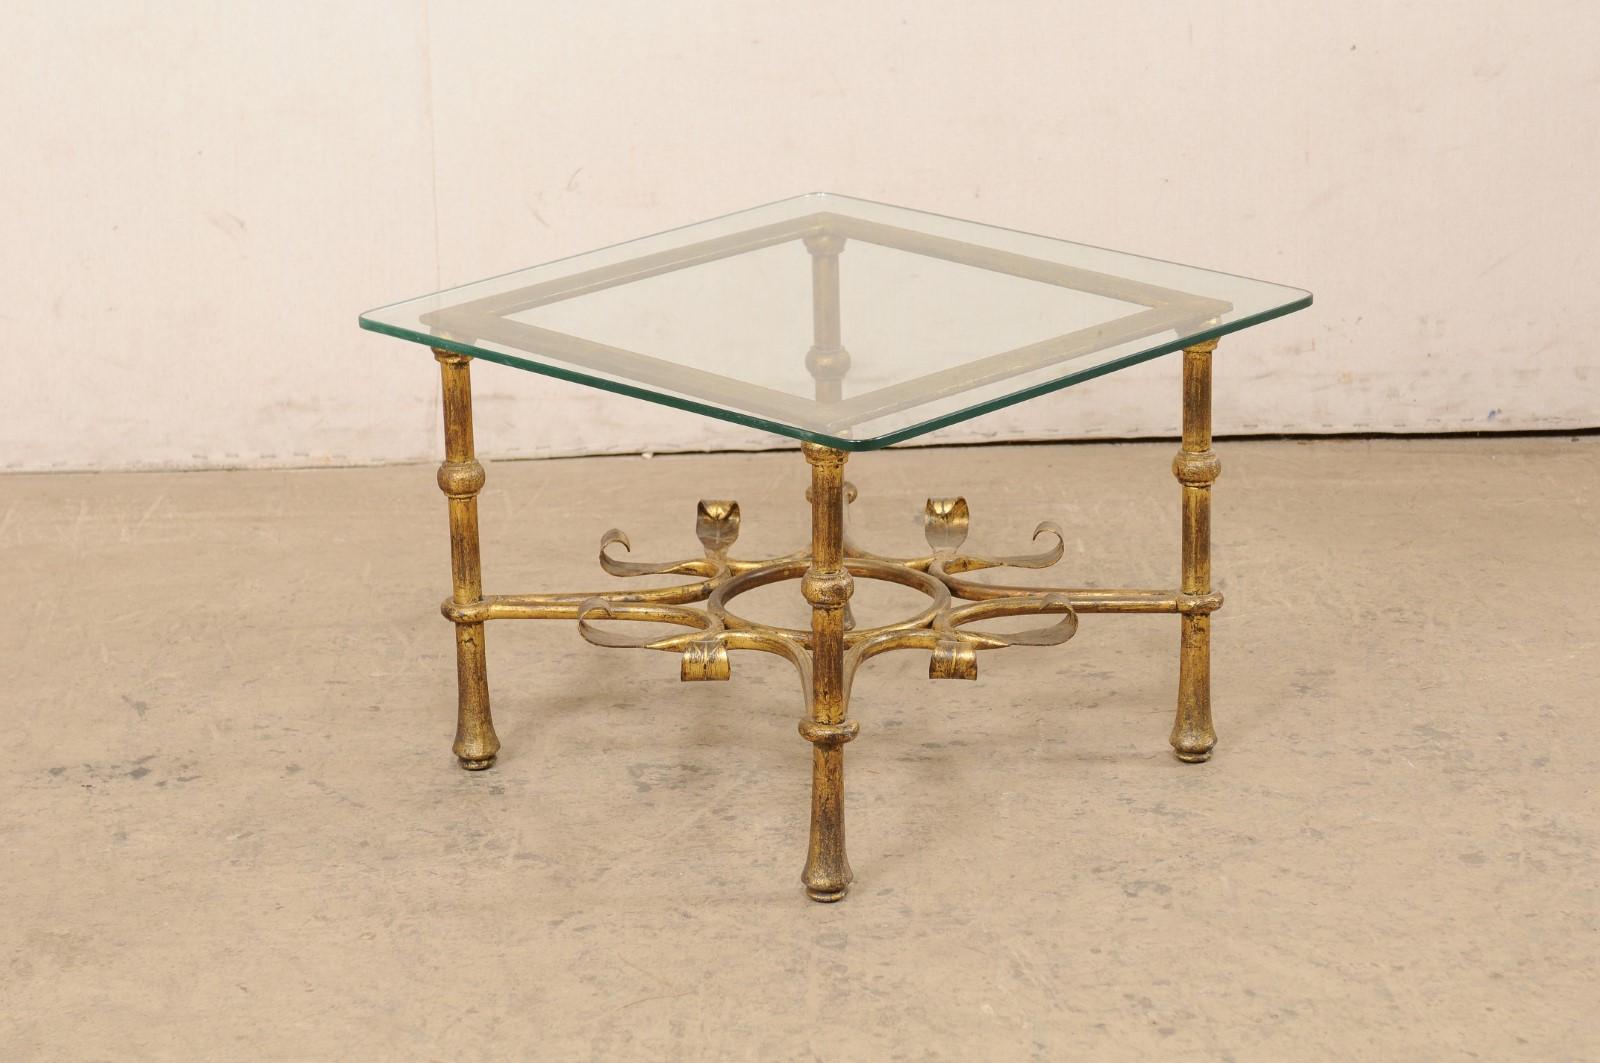 Spanish Accent Table with Gilt Iron Base & Square-Shaped Glass Top, Mid 20th C. For Sale 1